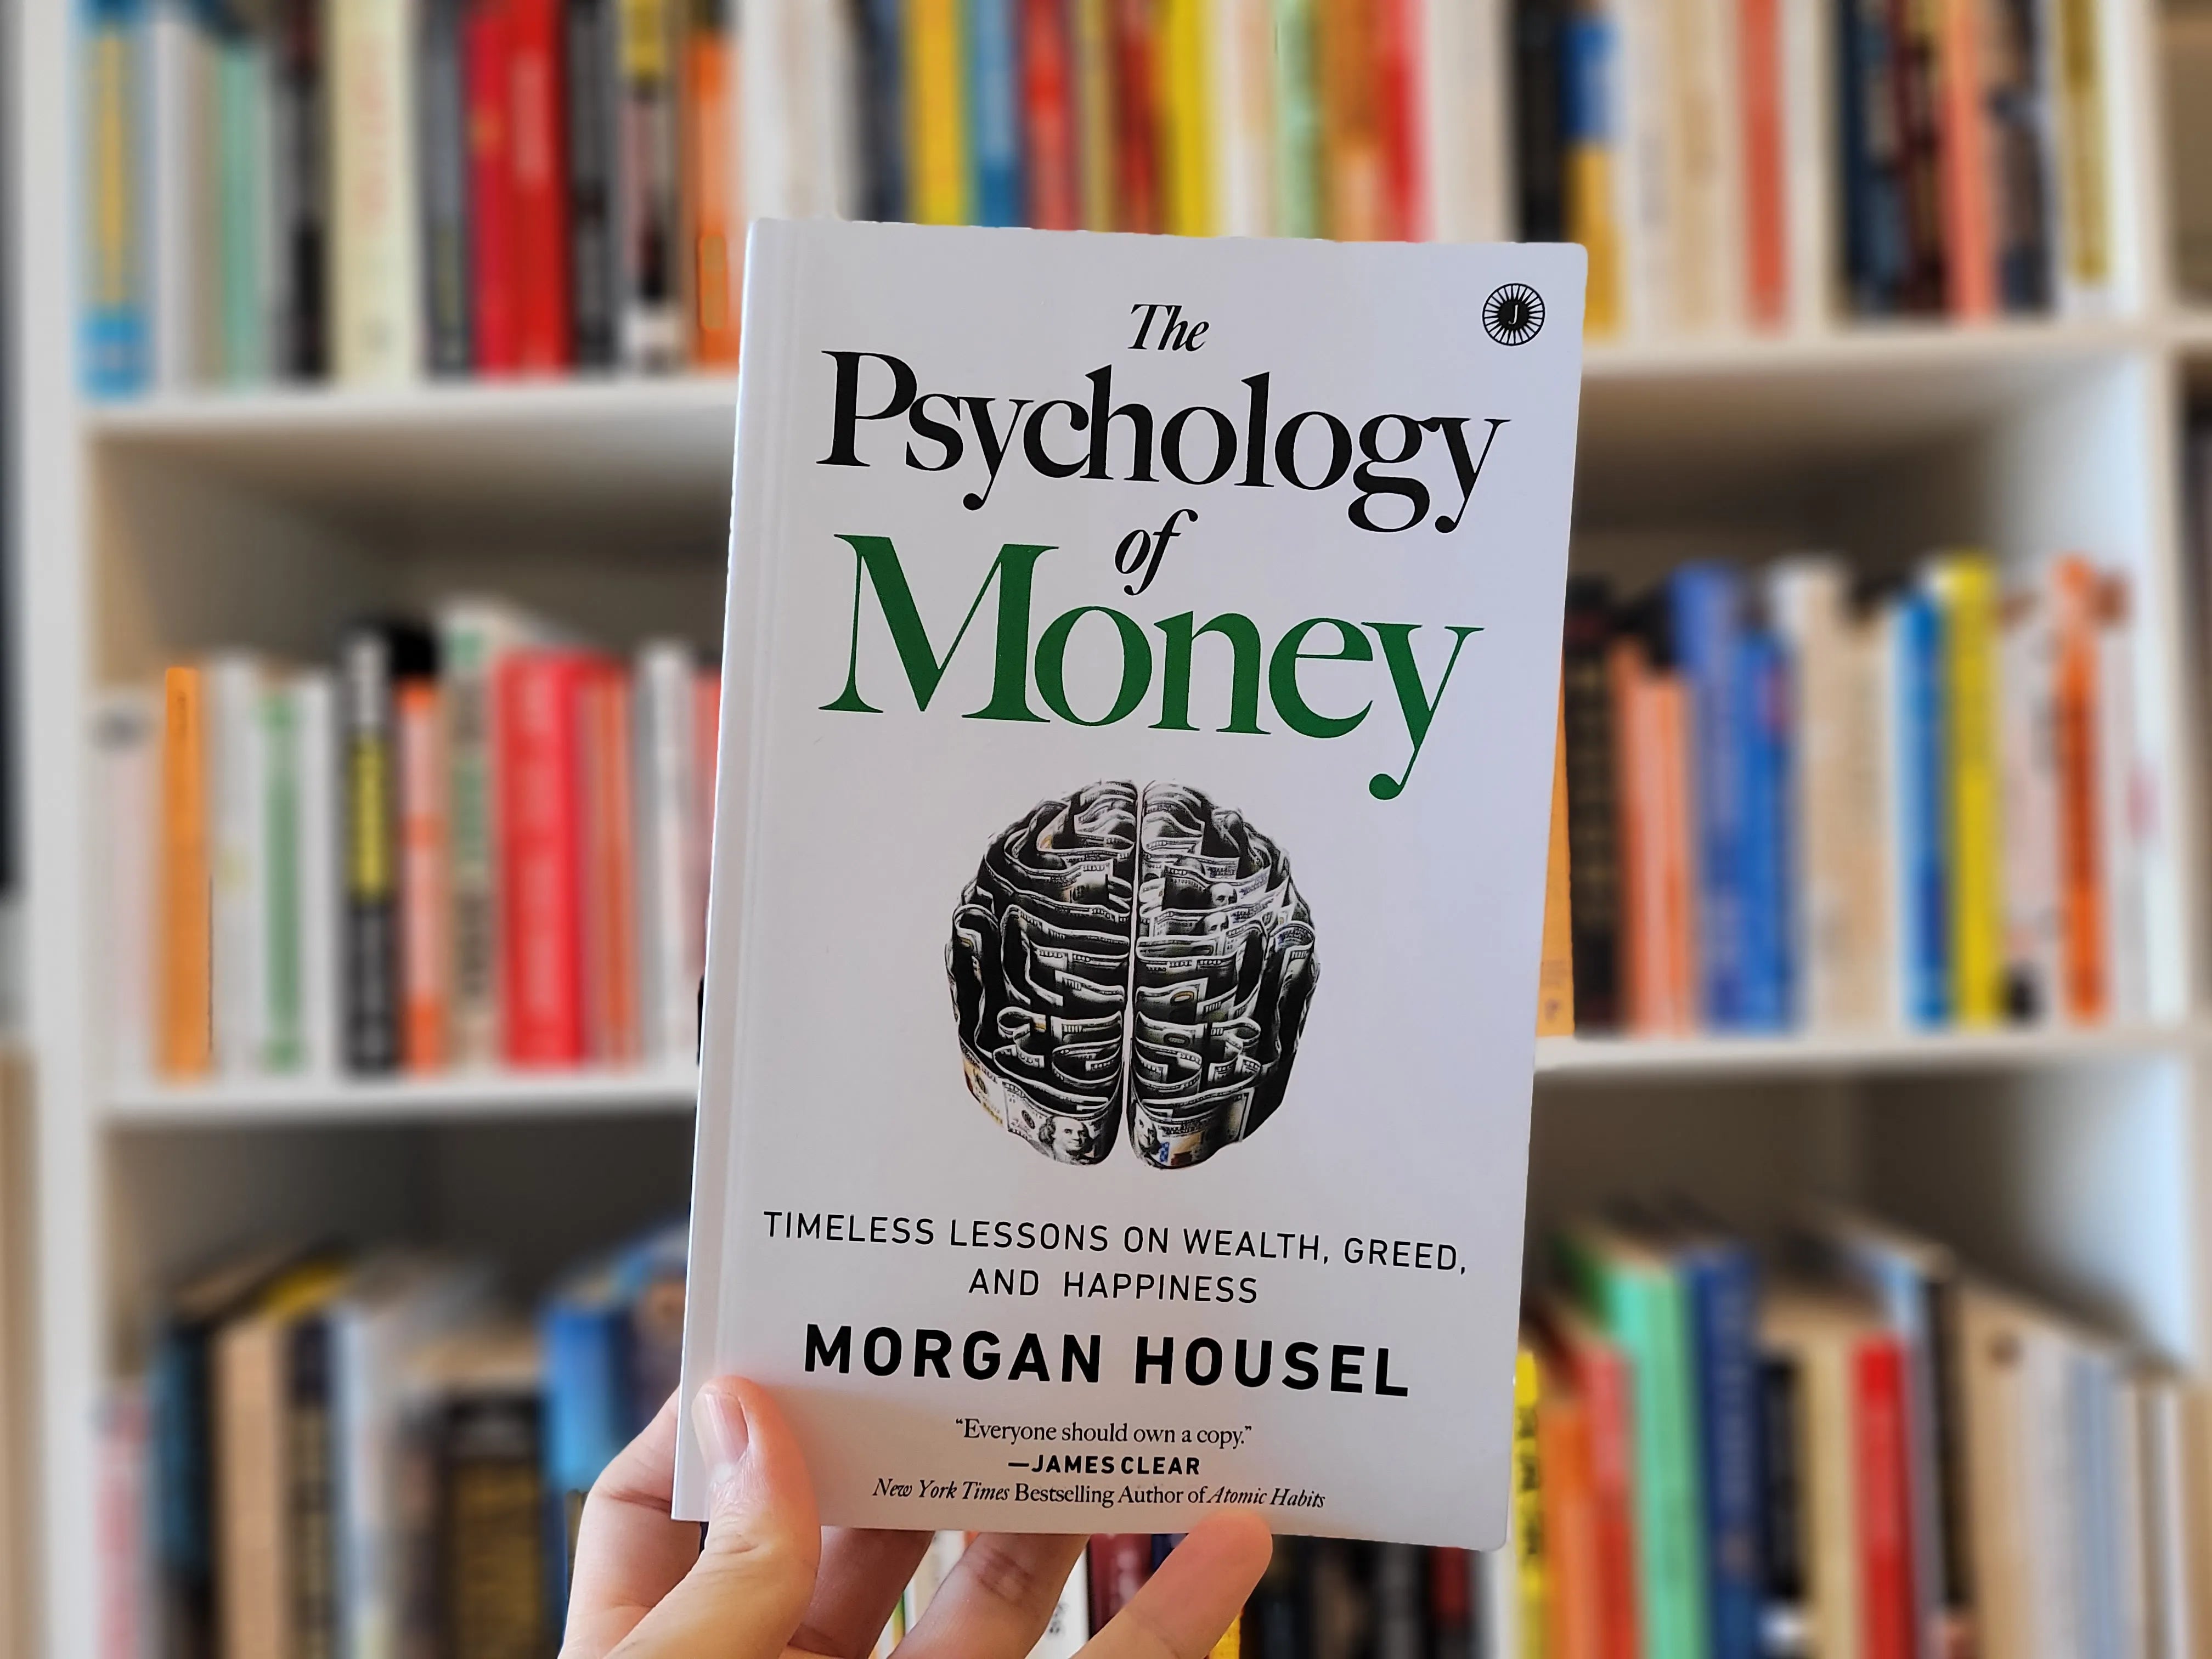 5 Timeless Lessons to Learn From "The Psychology of Money"